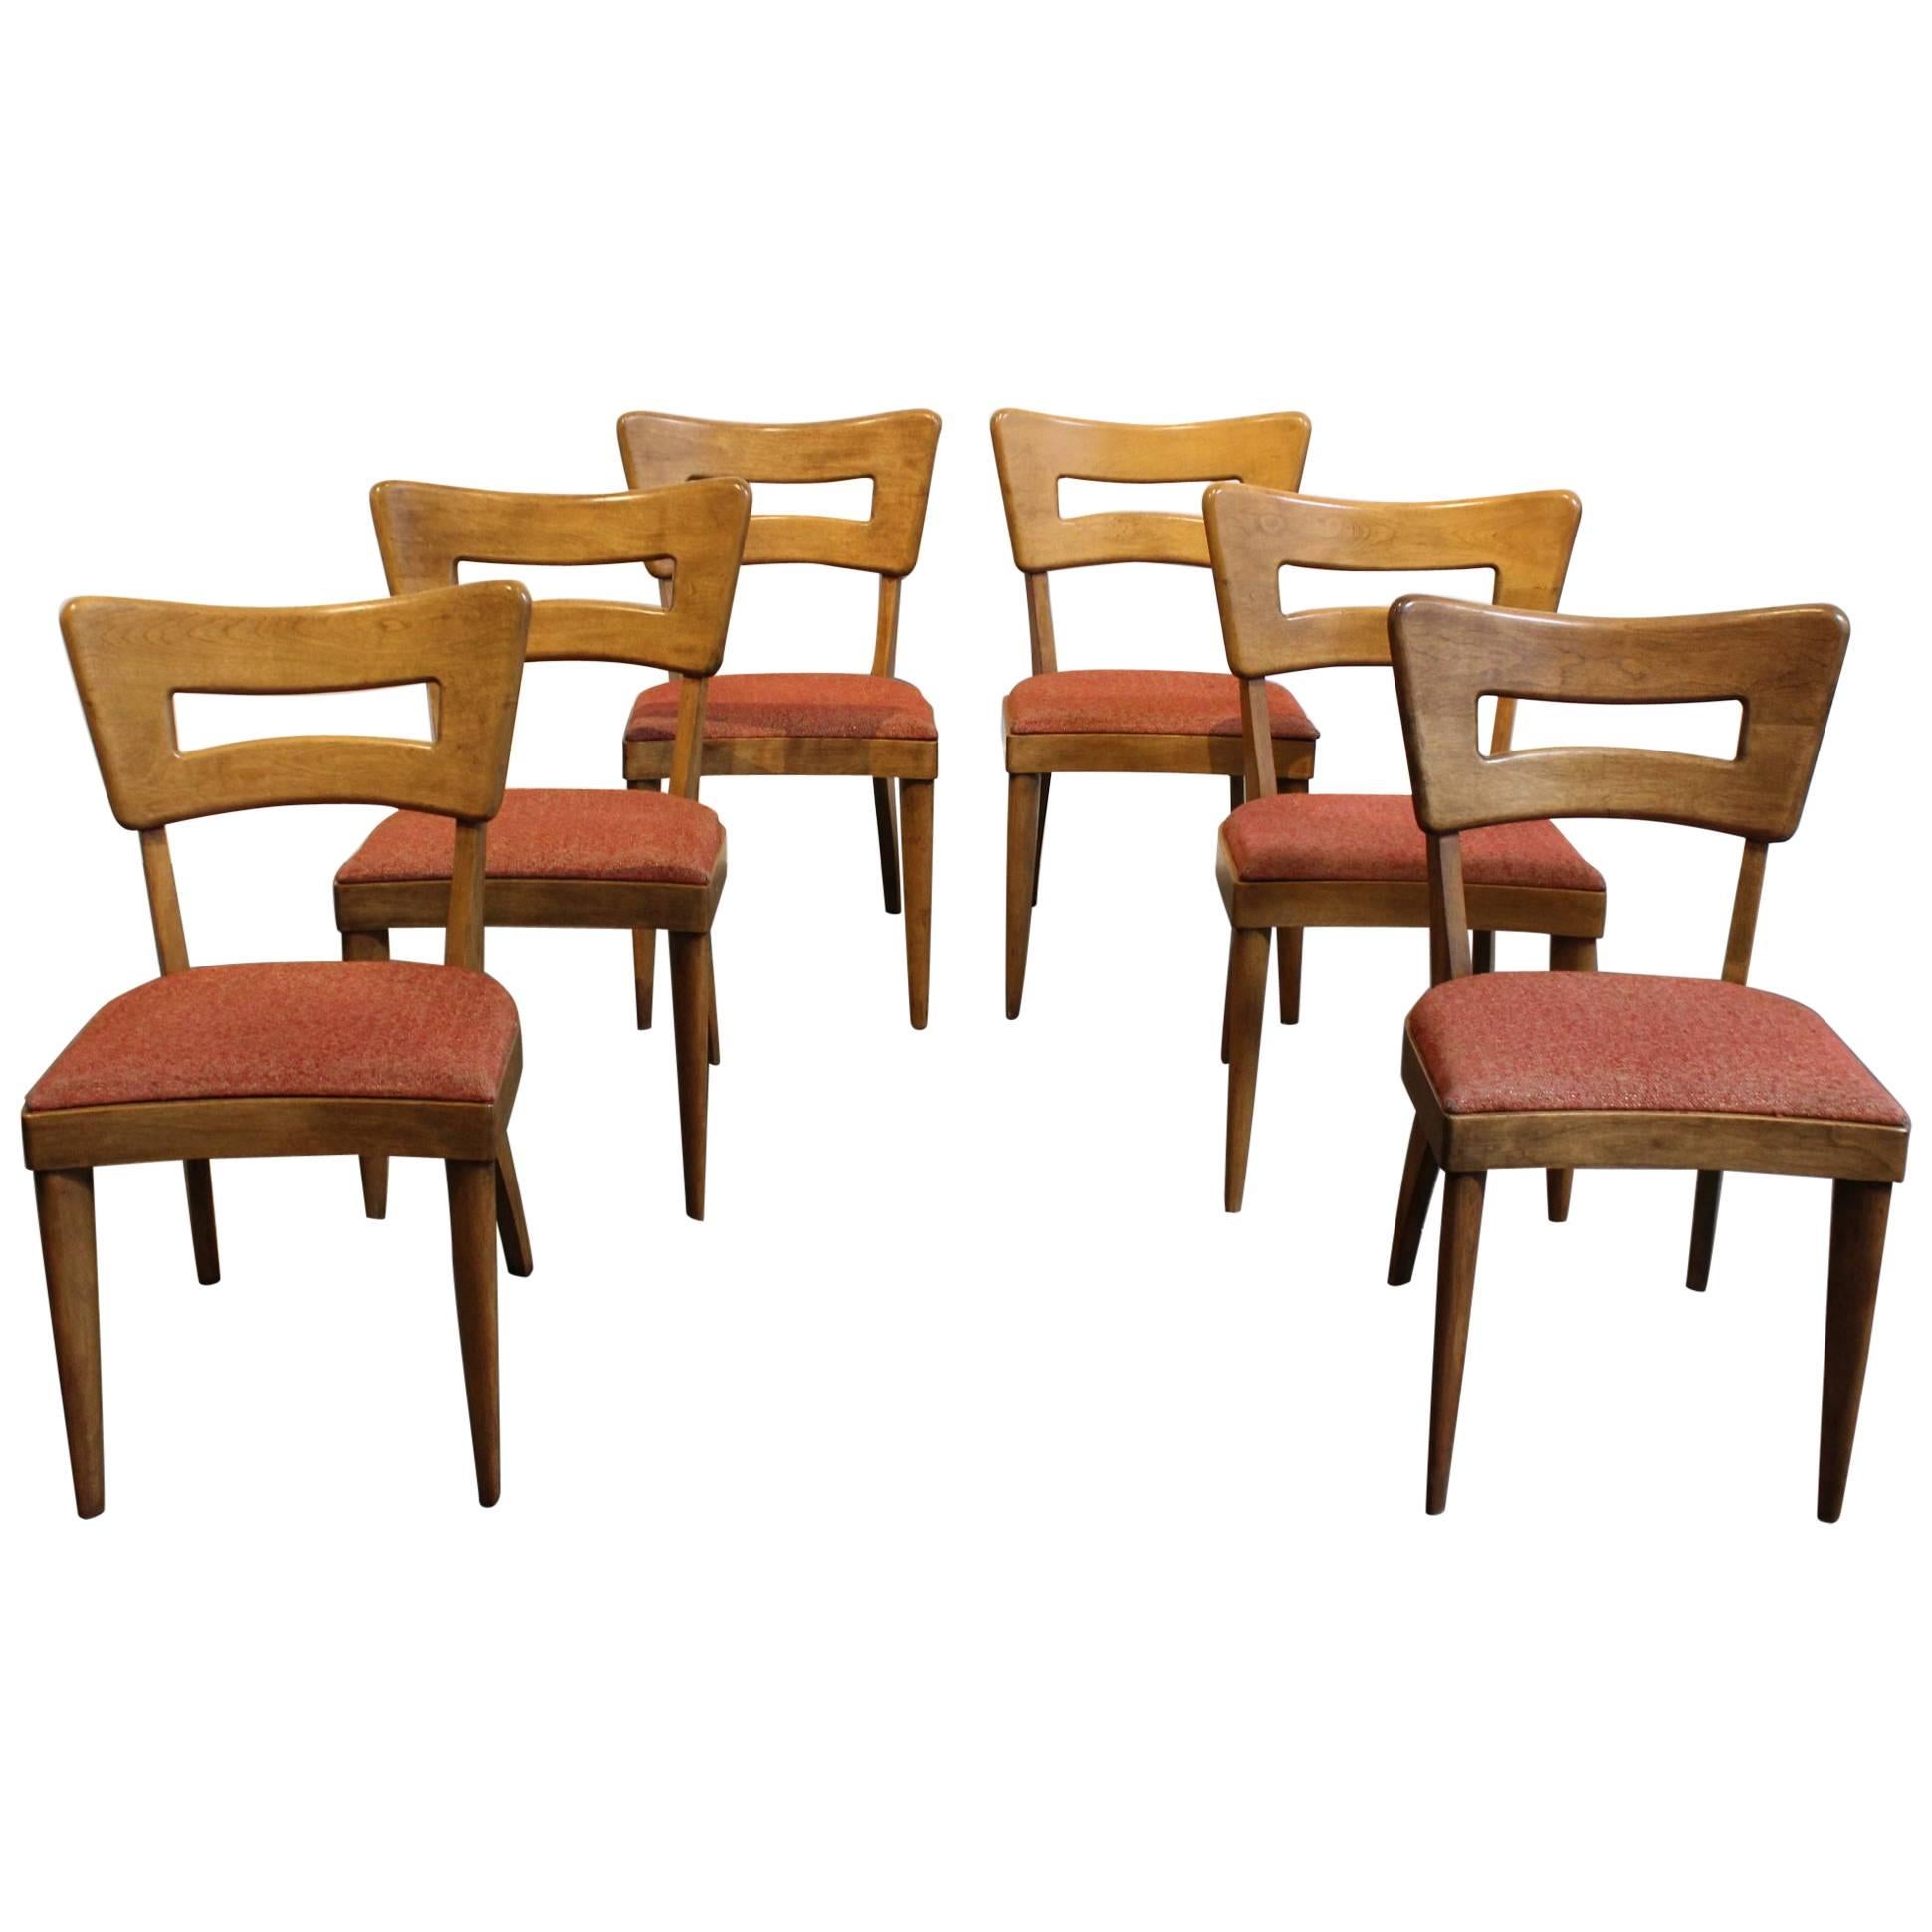 Set of Six Iconic Mid-Century Modern Heywood-Wakefield "Dog-Bone" Dining Chairs For Sale